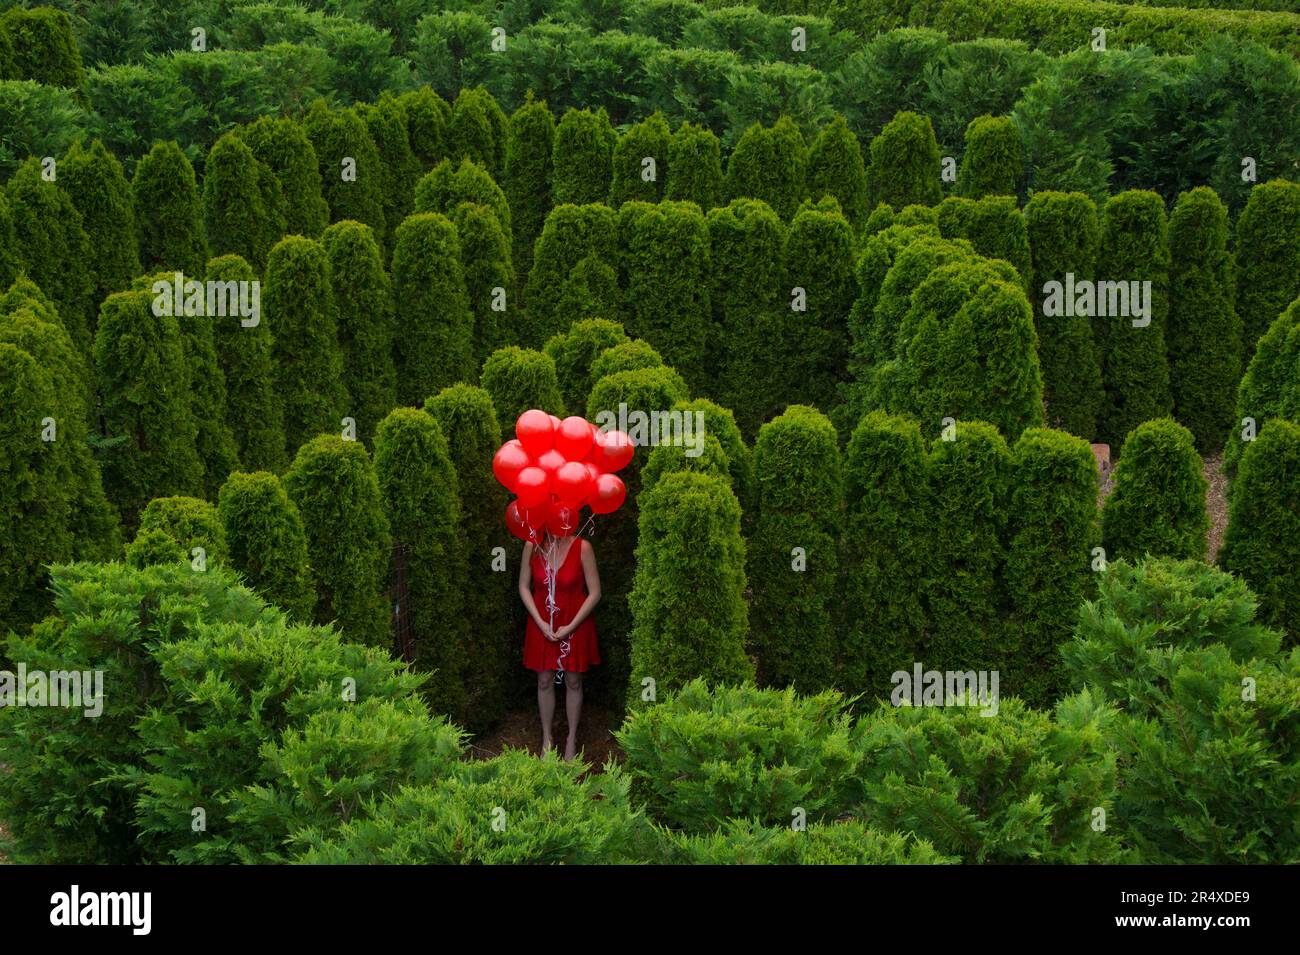 Young woman stands with a cluster of red balloons obscuring her face in a garden area; Luray, Virginia, United States of America Stock Photo